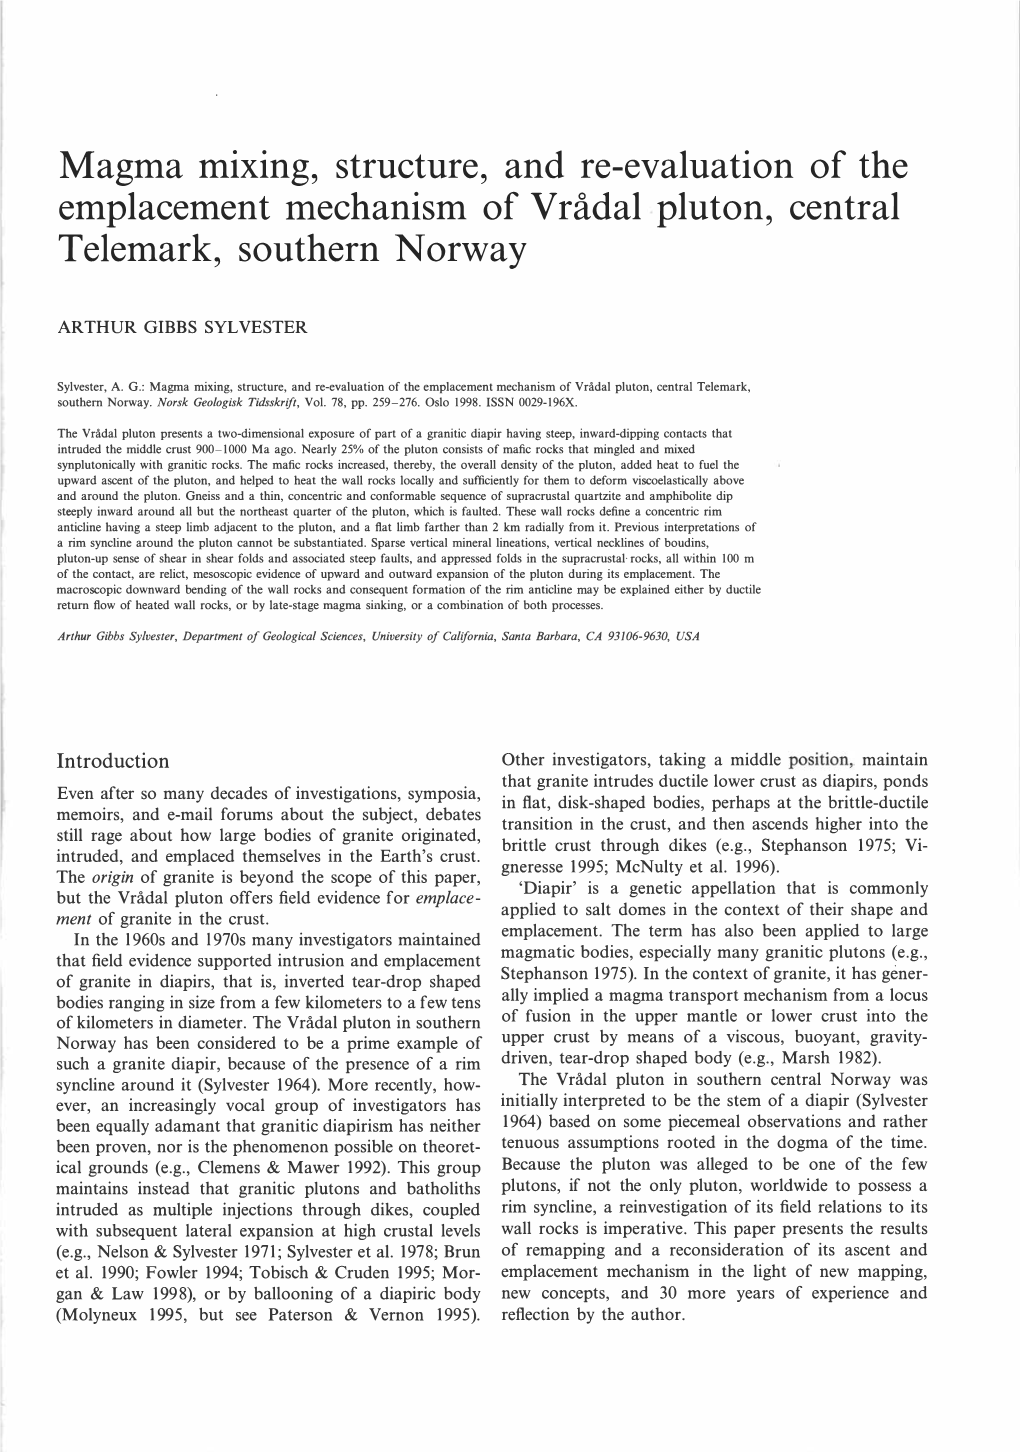 Magma Mixing, Structure, and Re-Evaluation of the Emplacement Mechanism of Vrådal Pluton, Central Telemark, Southern Norway